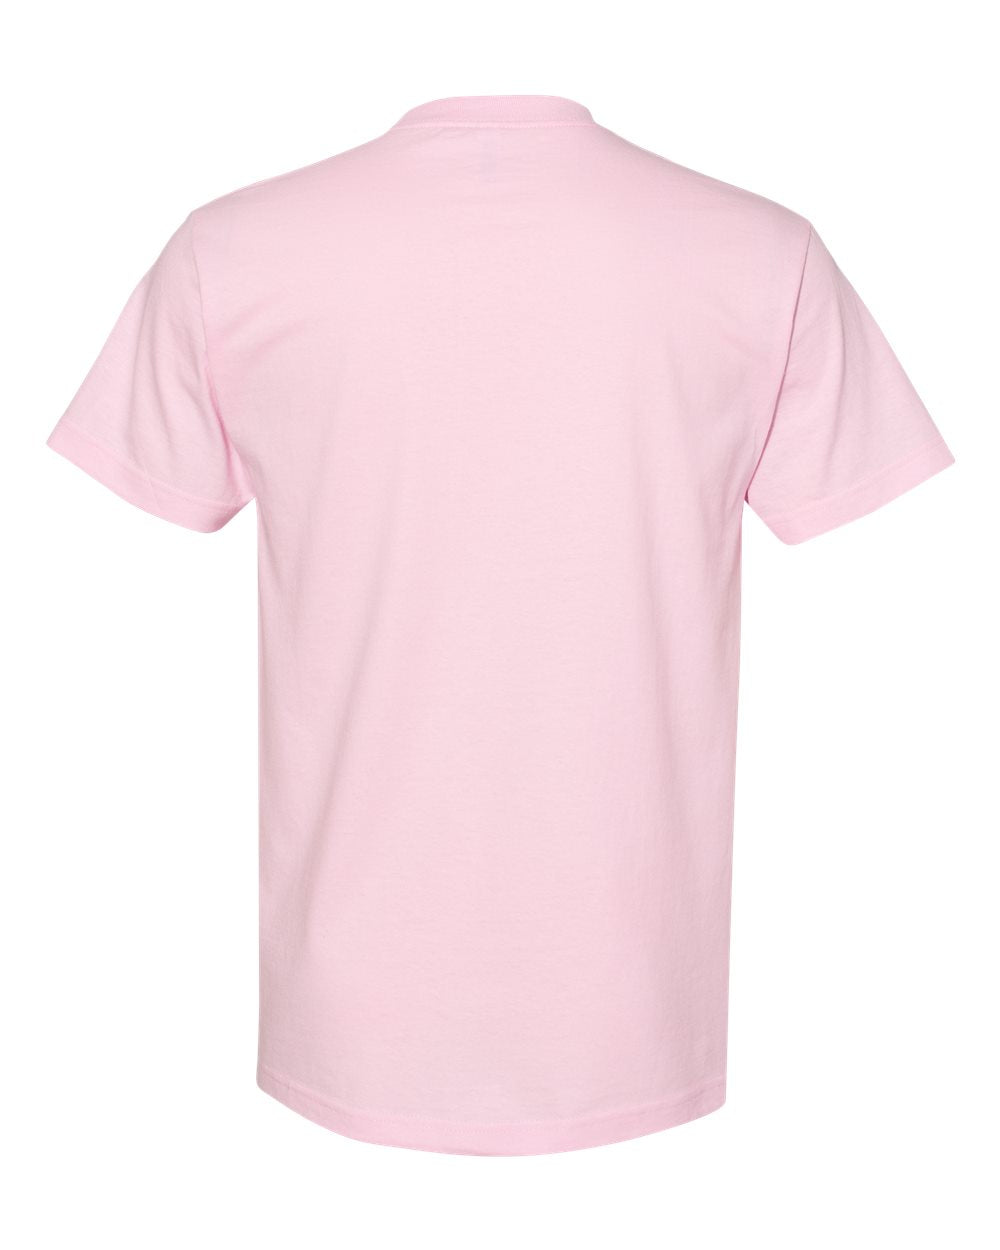 American Apparel Unisex Heavyweight Cotton Tee 1301 #color_Pink